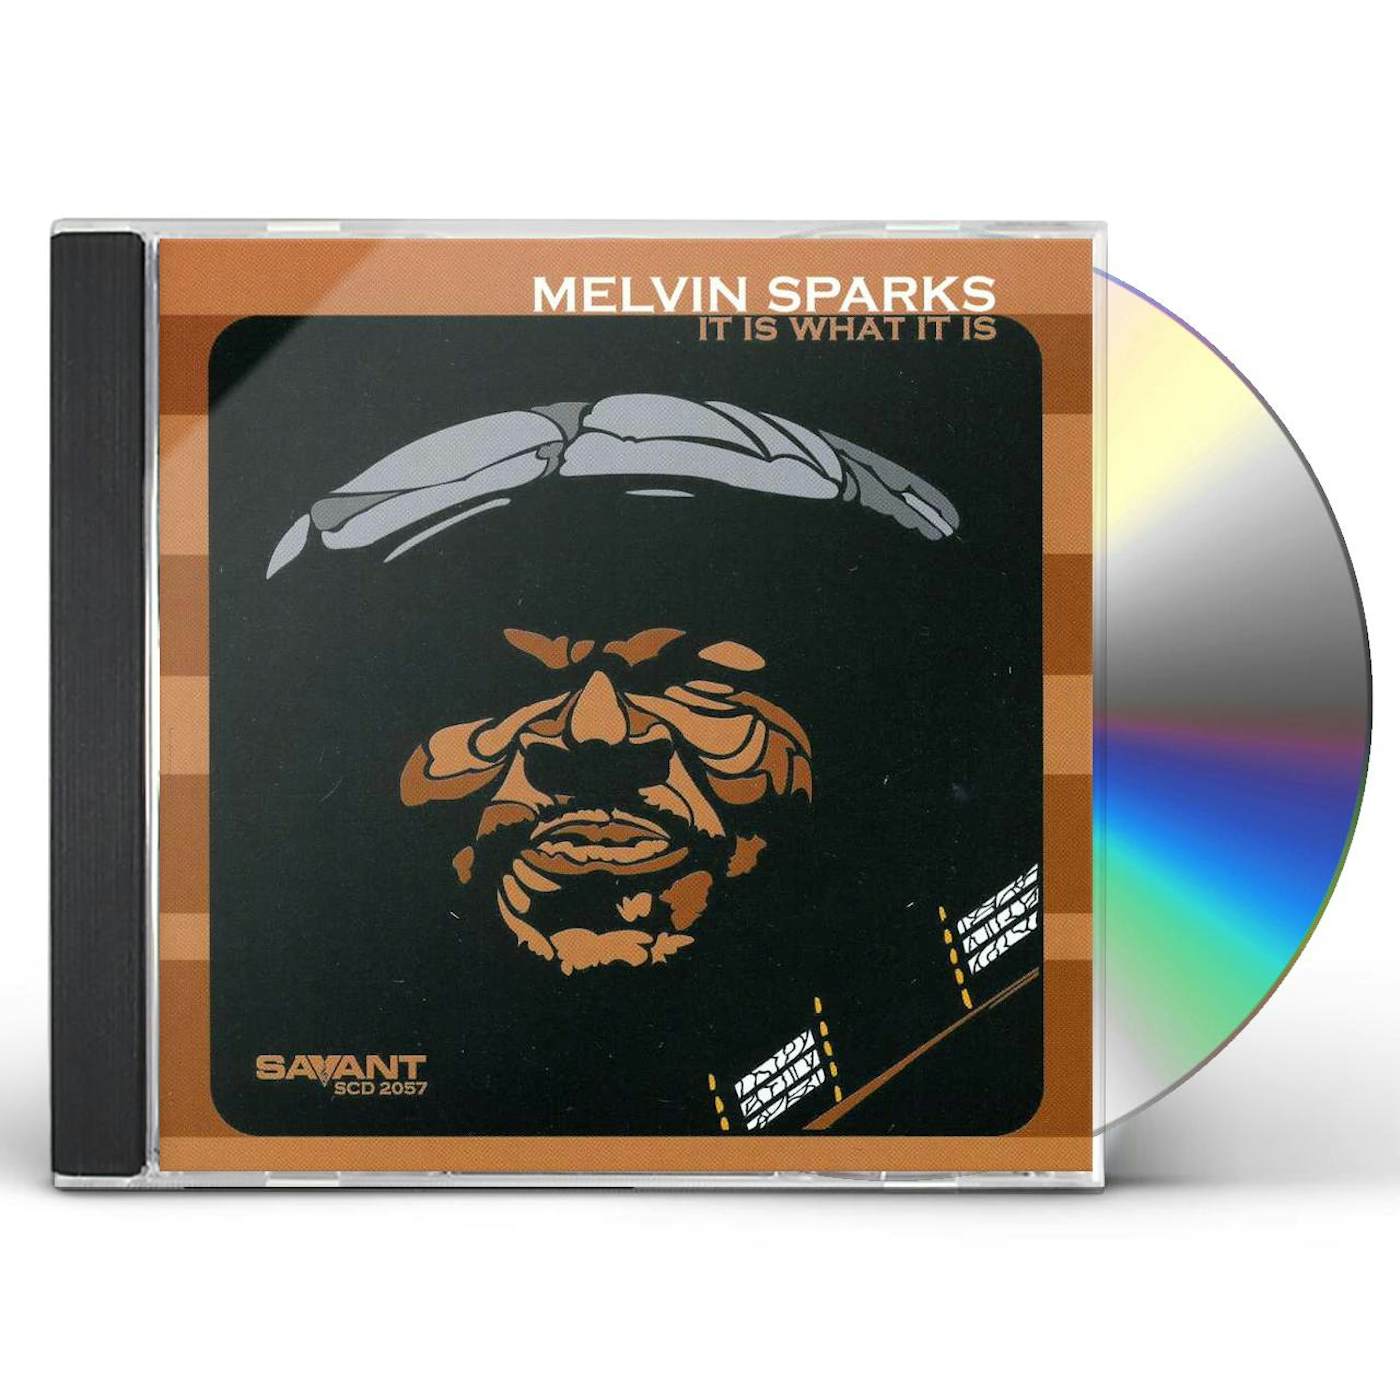 Melvin Sparks IT IS WHAT IT IS CD